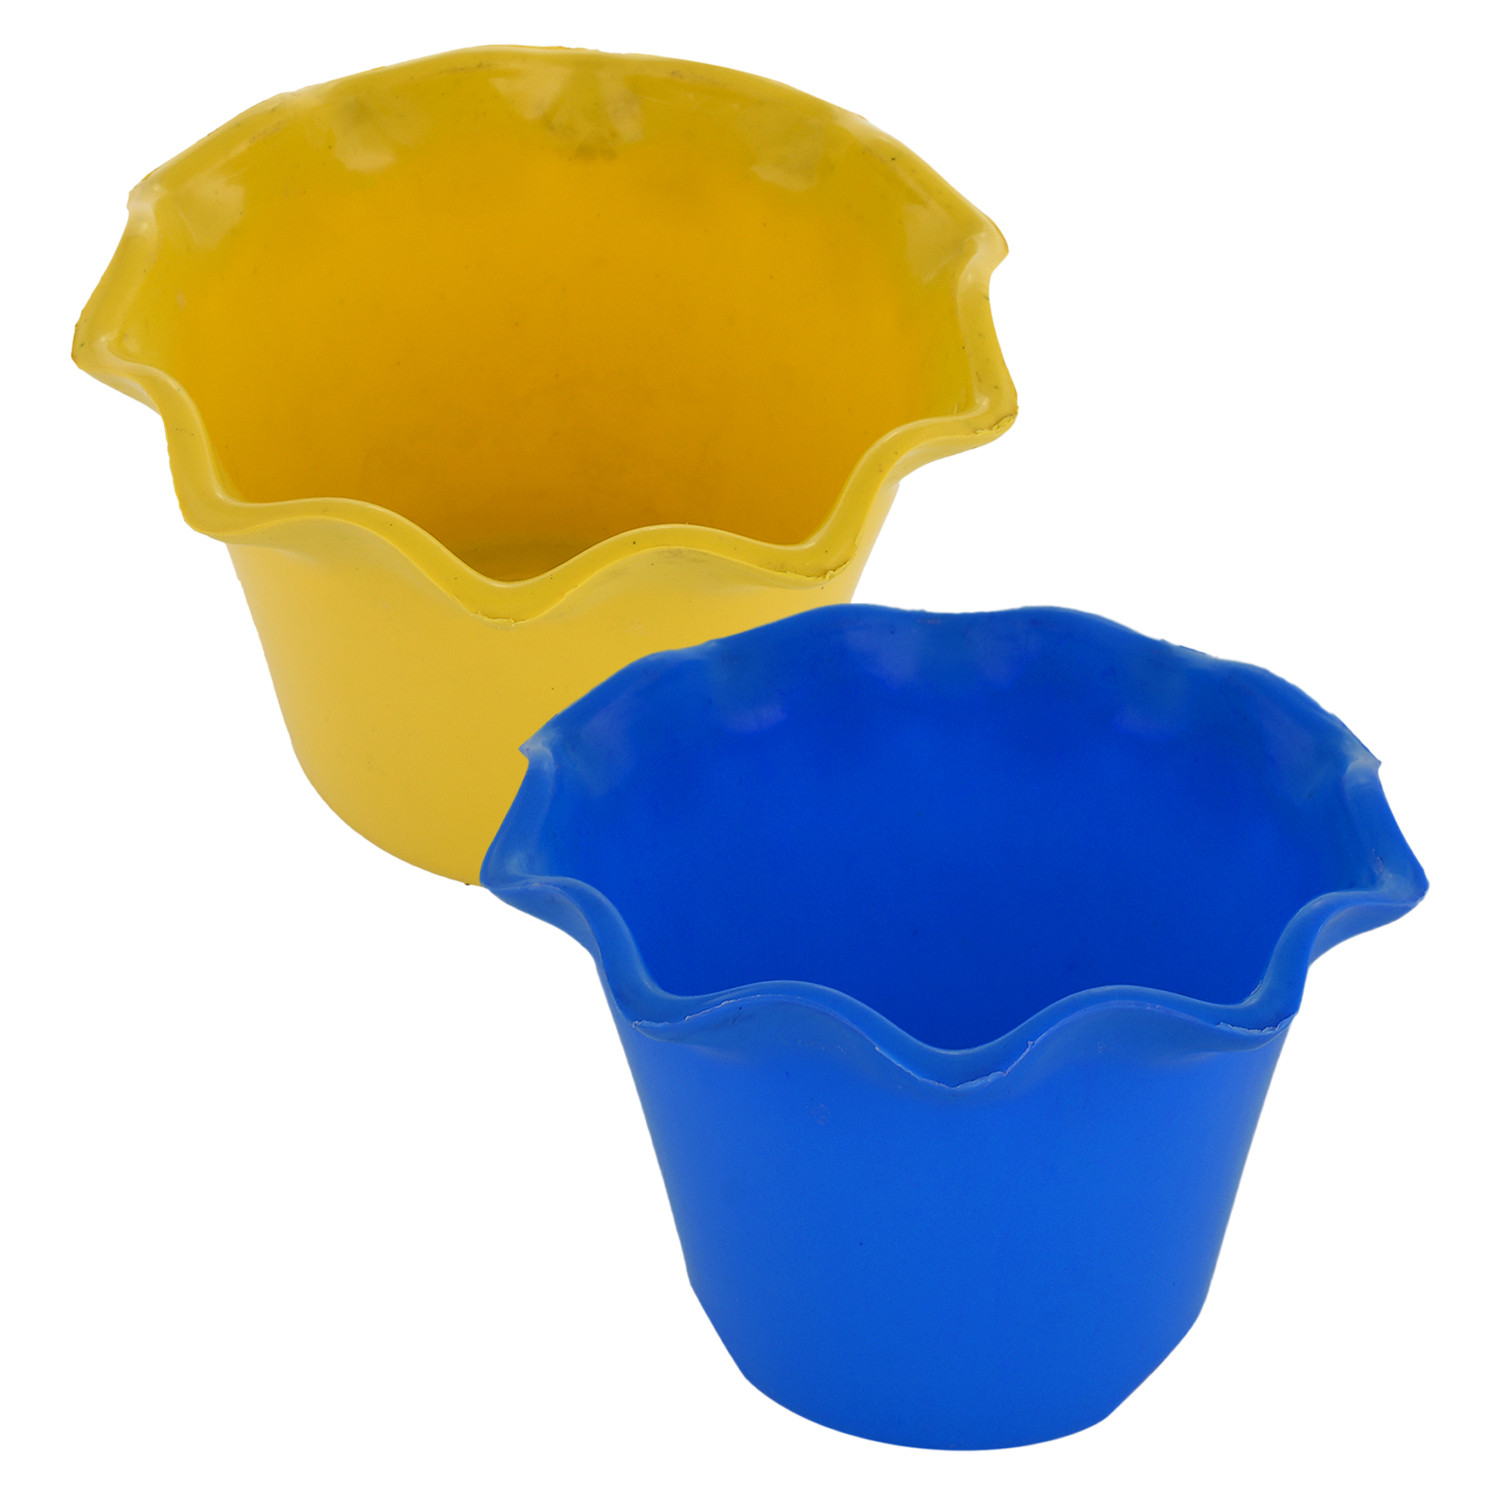 Kuber Industries Blossom Flower Pot|Durable Plastic Flower Pot|Gamla With Drain Holes for Home Décor|Balcony|Garden|8 Inch|Pack of 2 (Blue & Yellow)